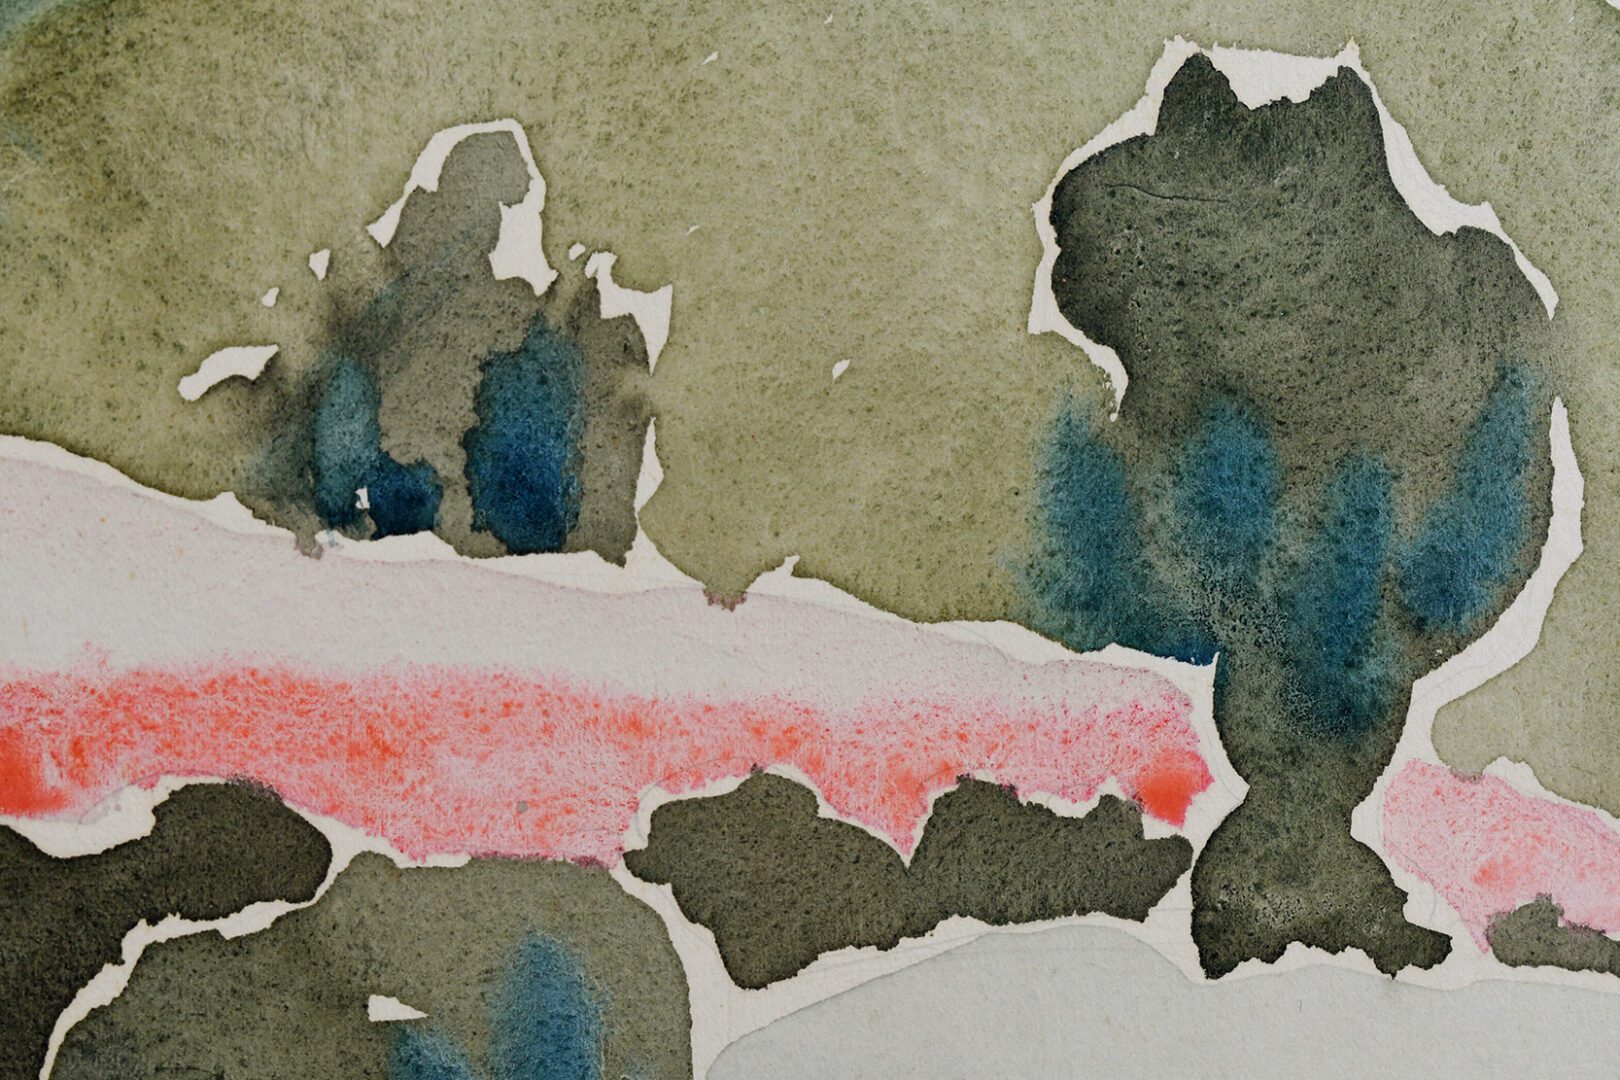 detail of Georgia O'Keeffe watercolor painting